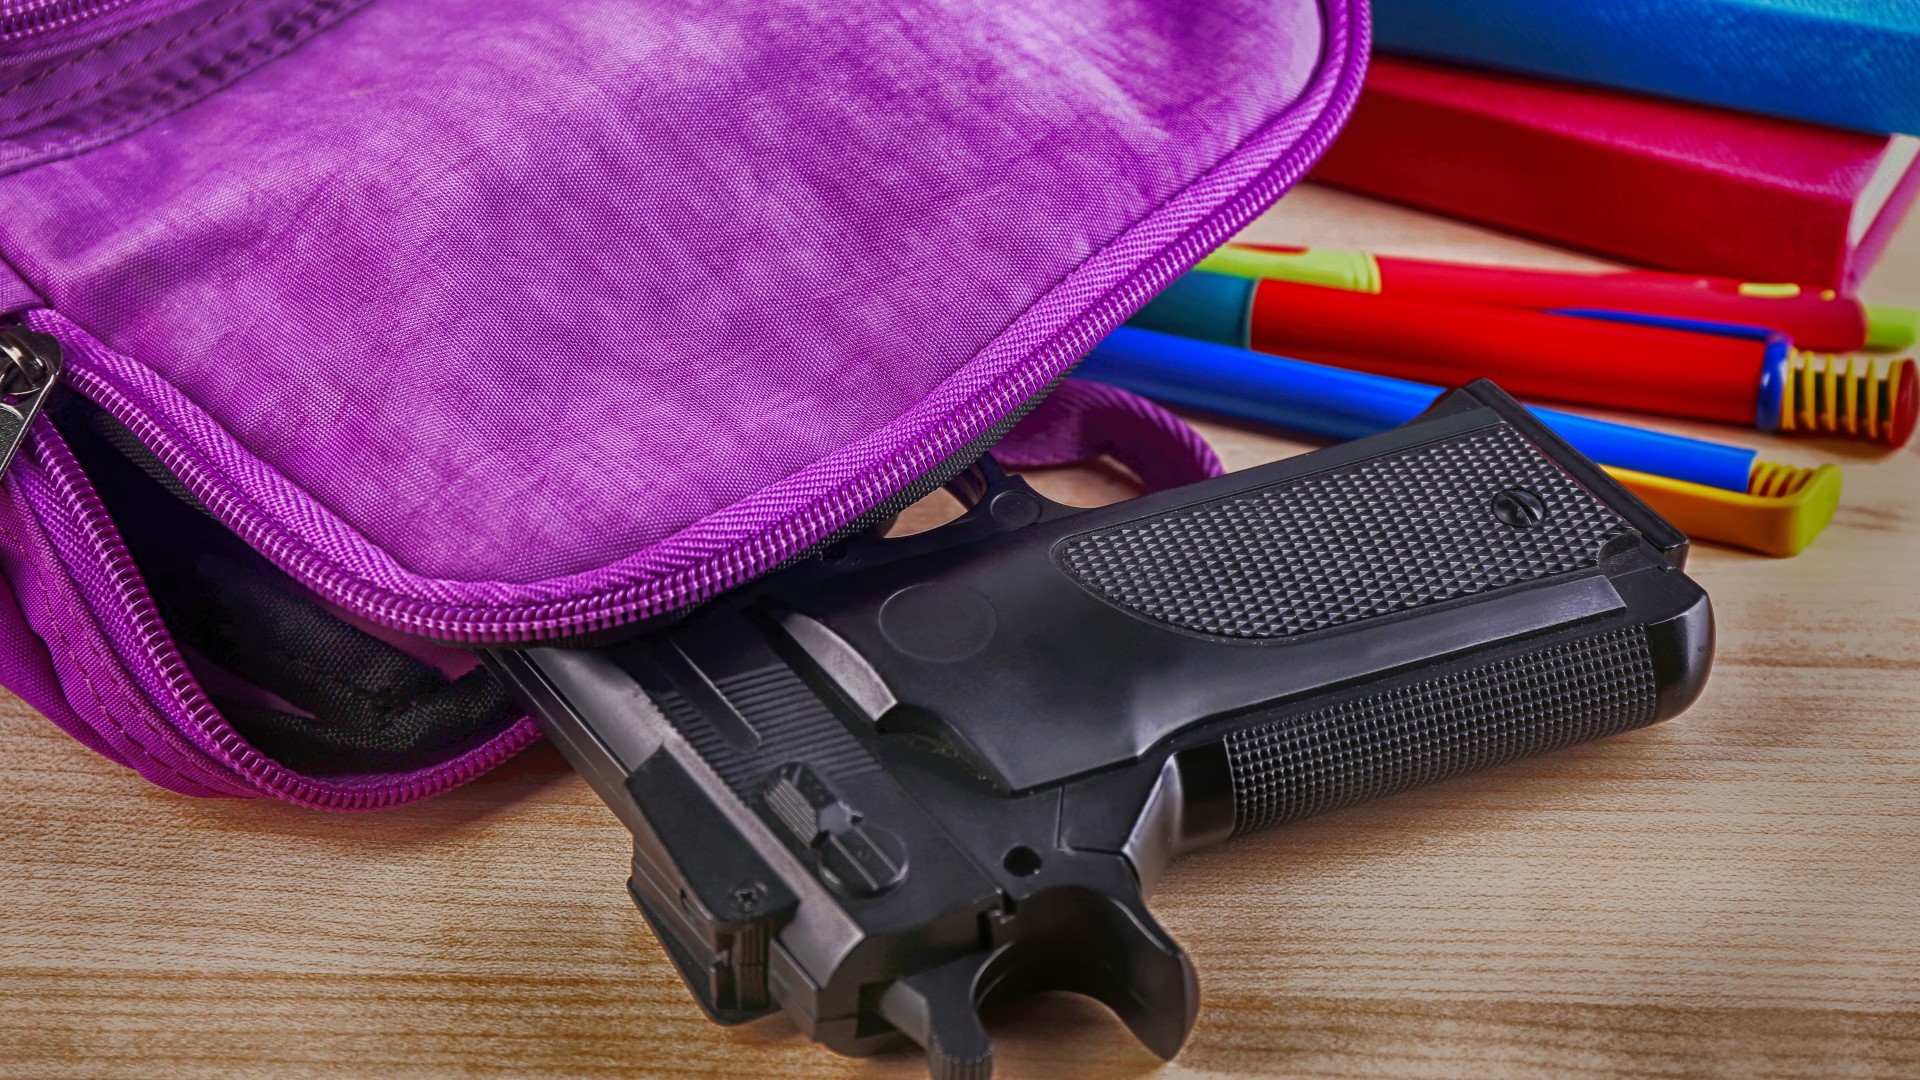 Governor Bill Lee signed a bill into law that lets teachers who go through training and notify administrators to bring concealed handguns to school.